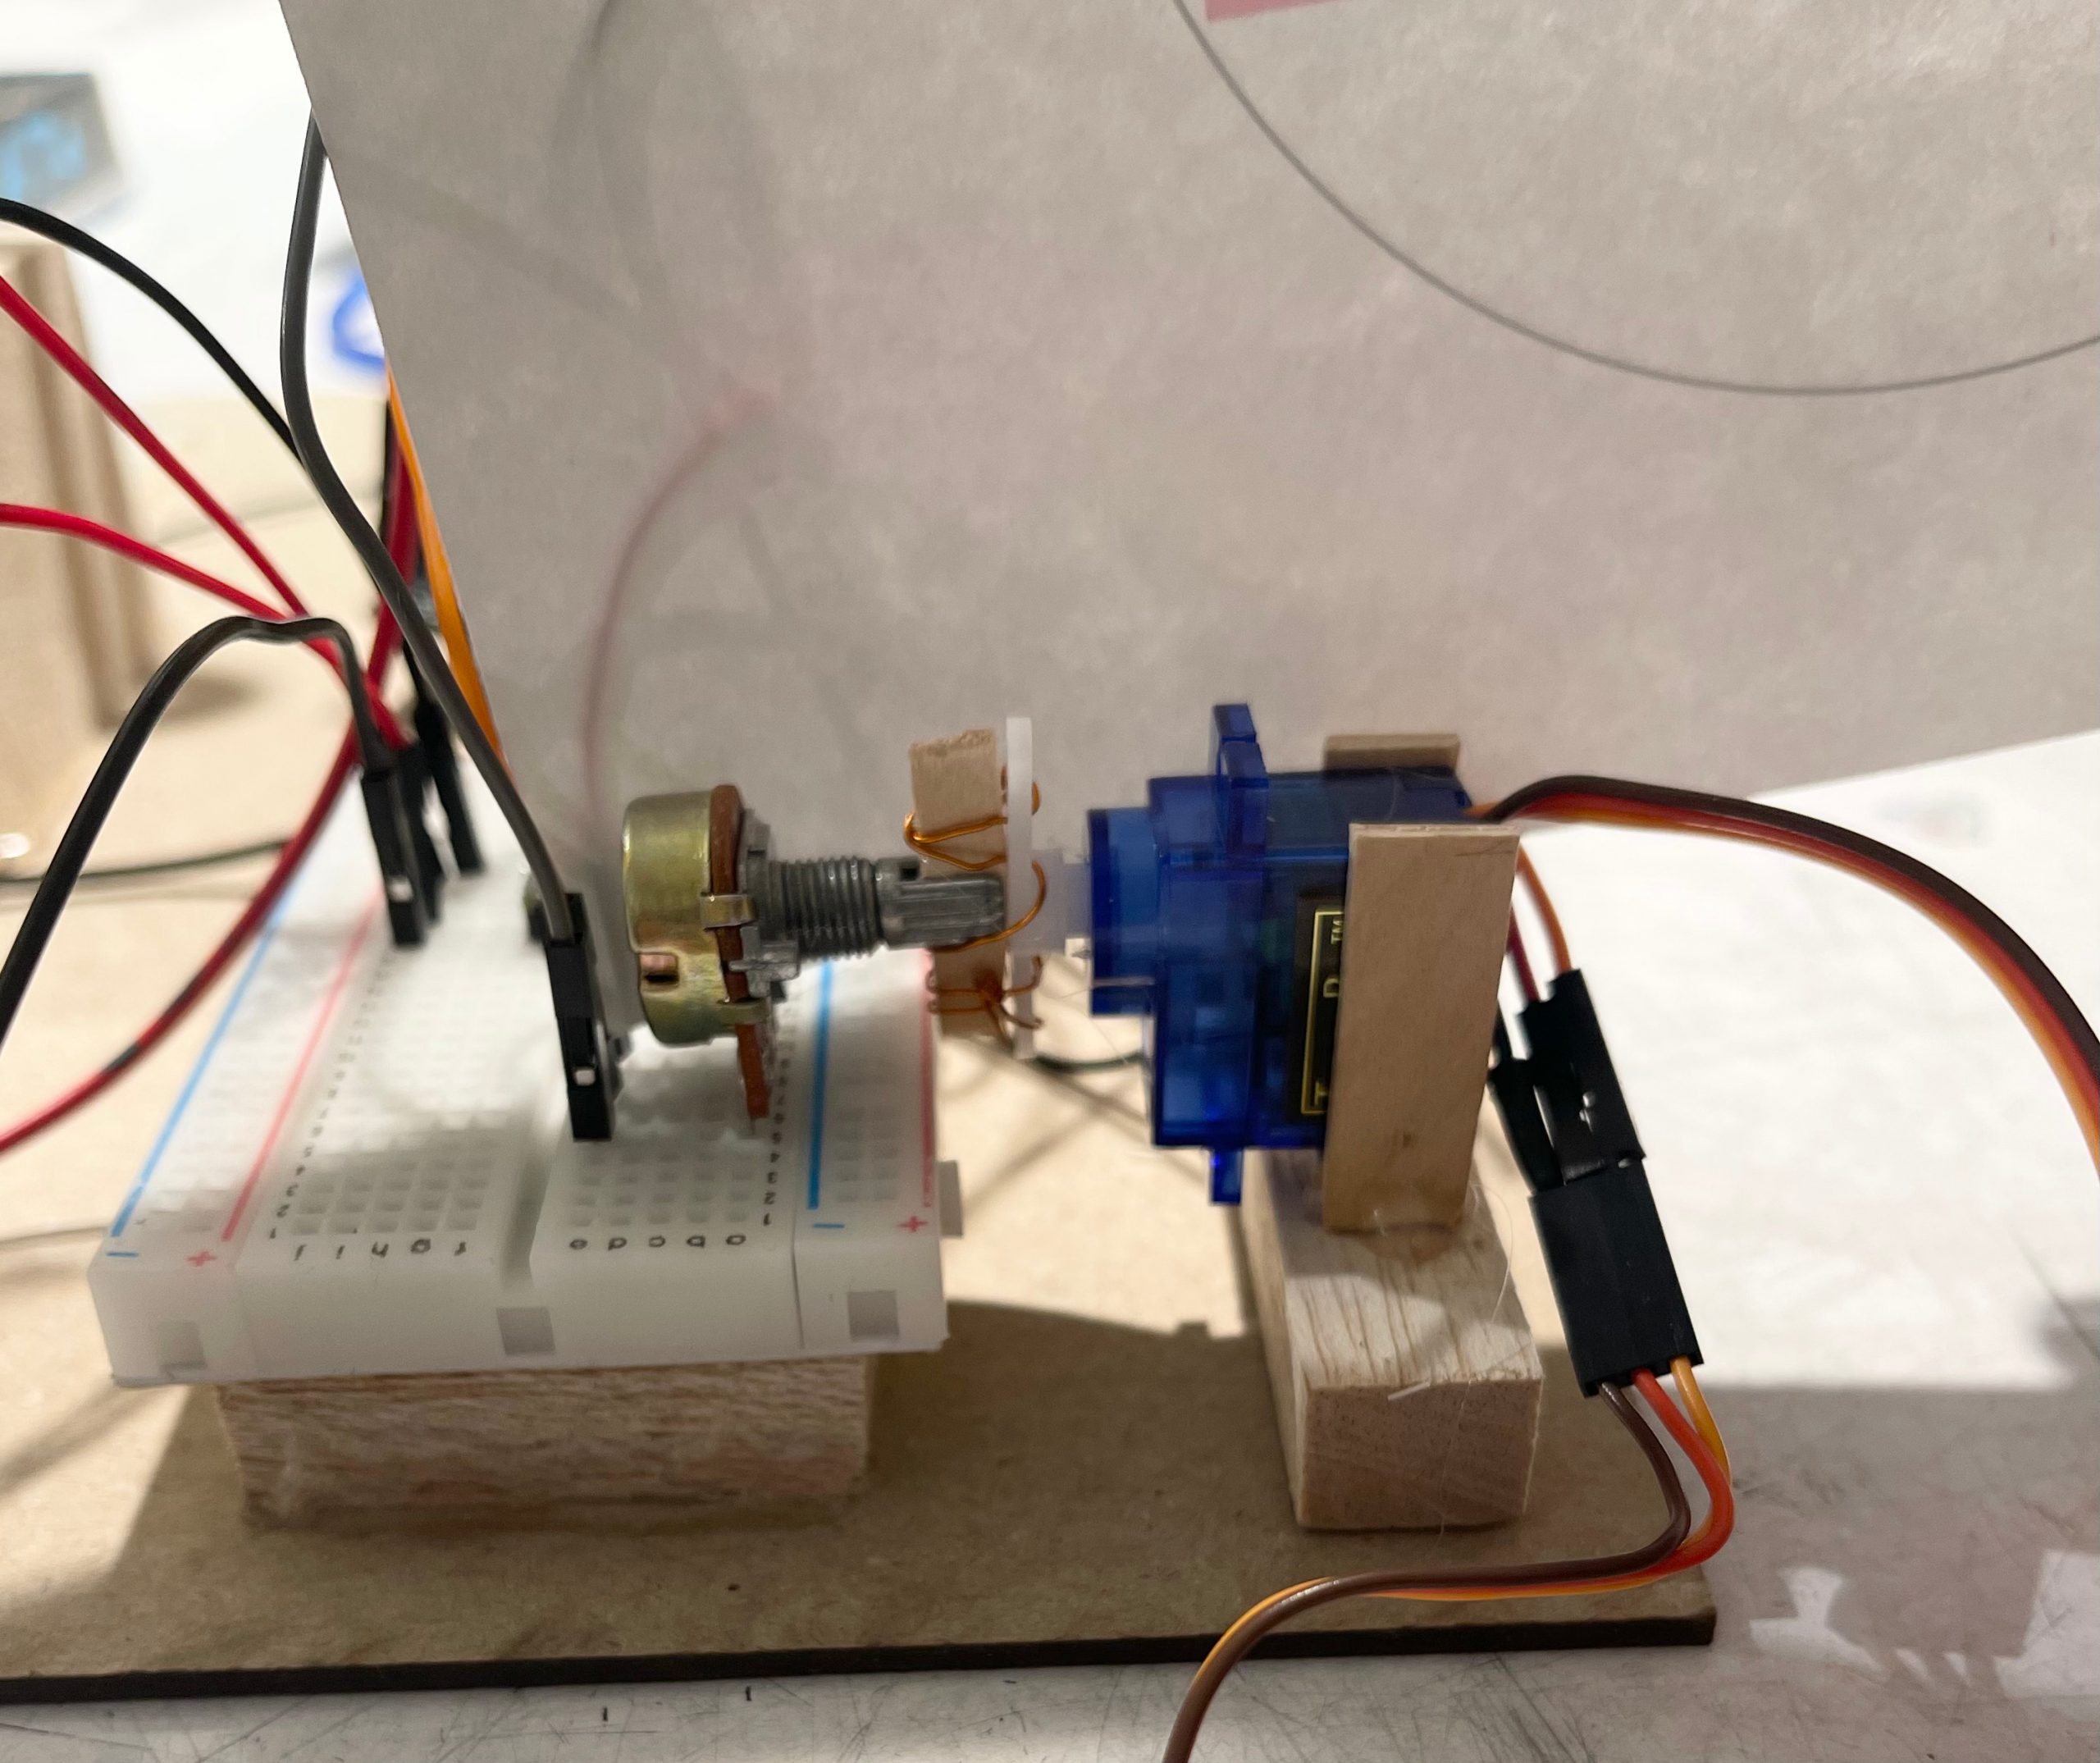 Servo motor attached to potentiometer with wires.